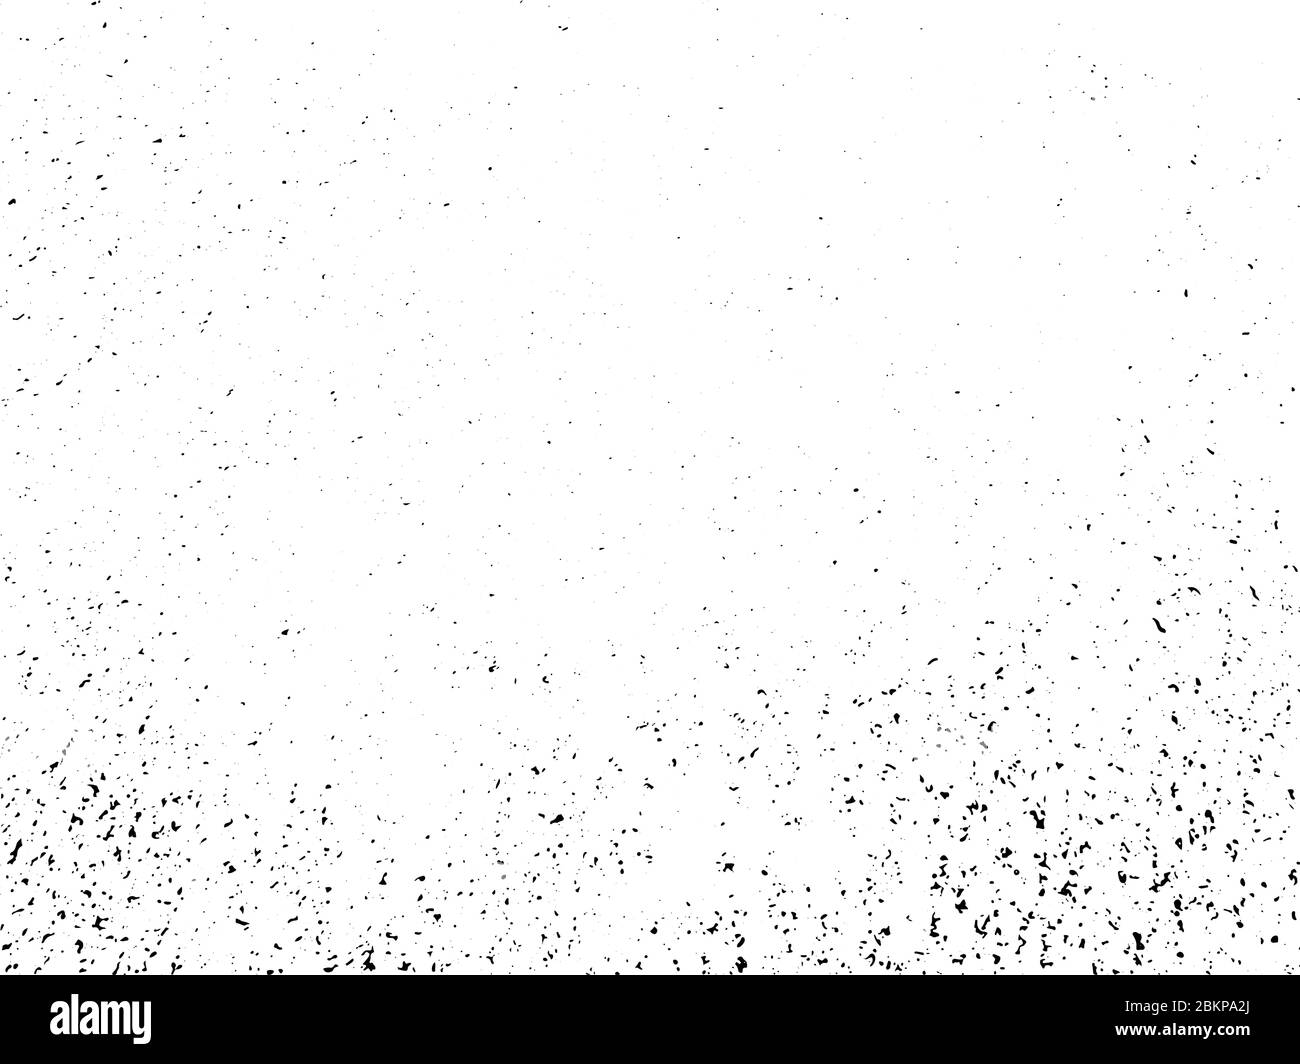 Distressed overlay texture. Rusty metal abstract background. Grunge backdrop of rusted steel surface stylized image. Eroded metallic plate in black an Stock Vector